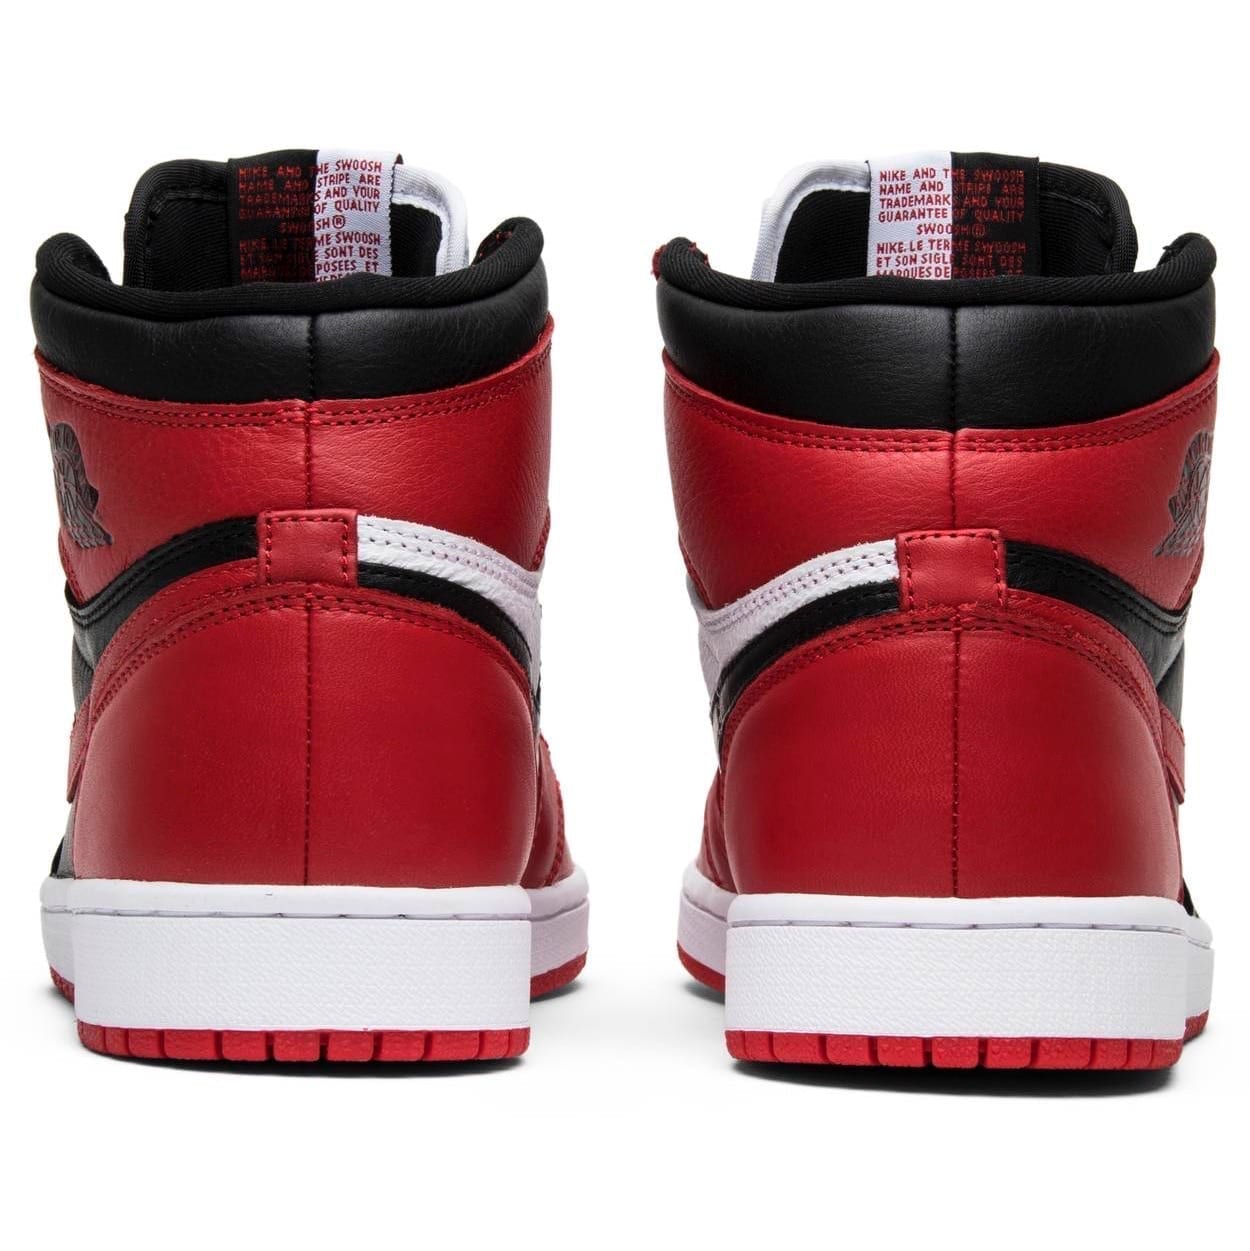 Air Jordan 1 Retro High Homage To Home (Non-numbered)